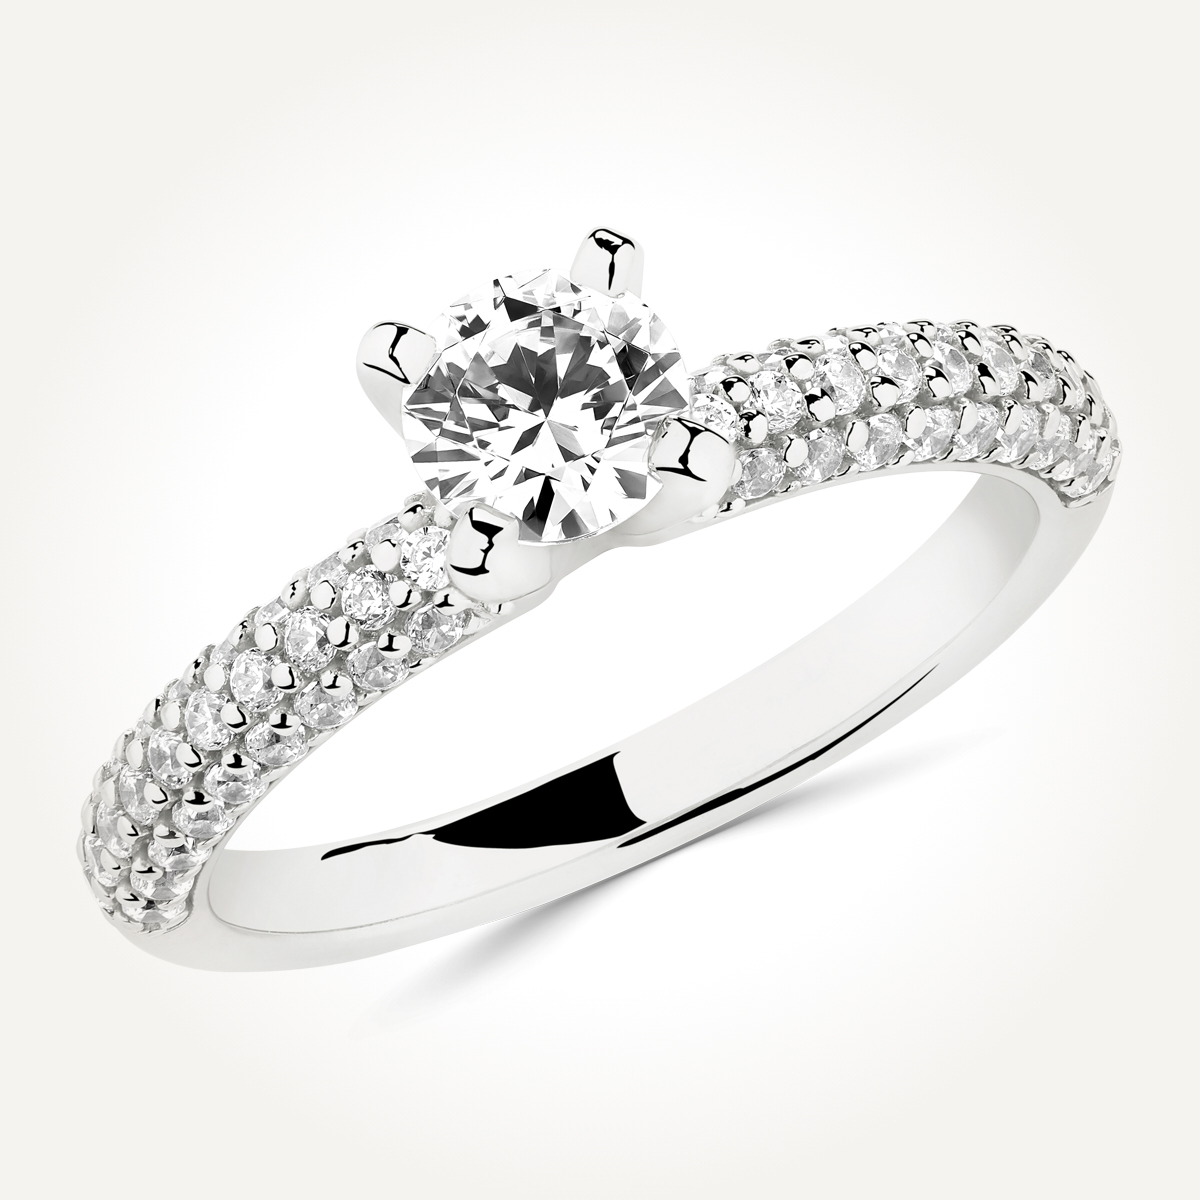 Multi Stone Engagement Ring - 7527 A